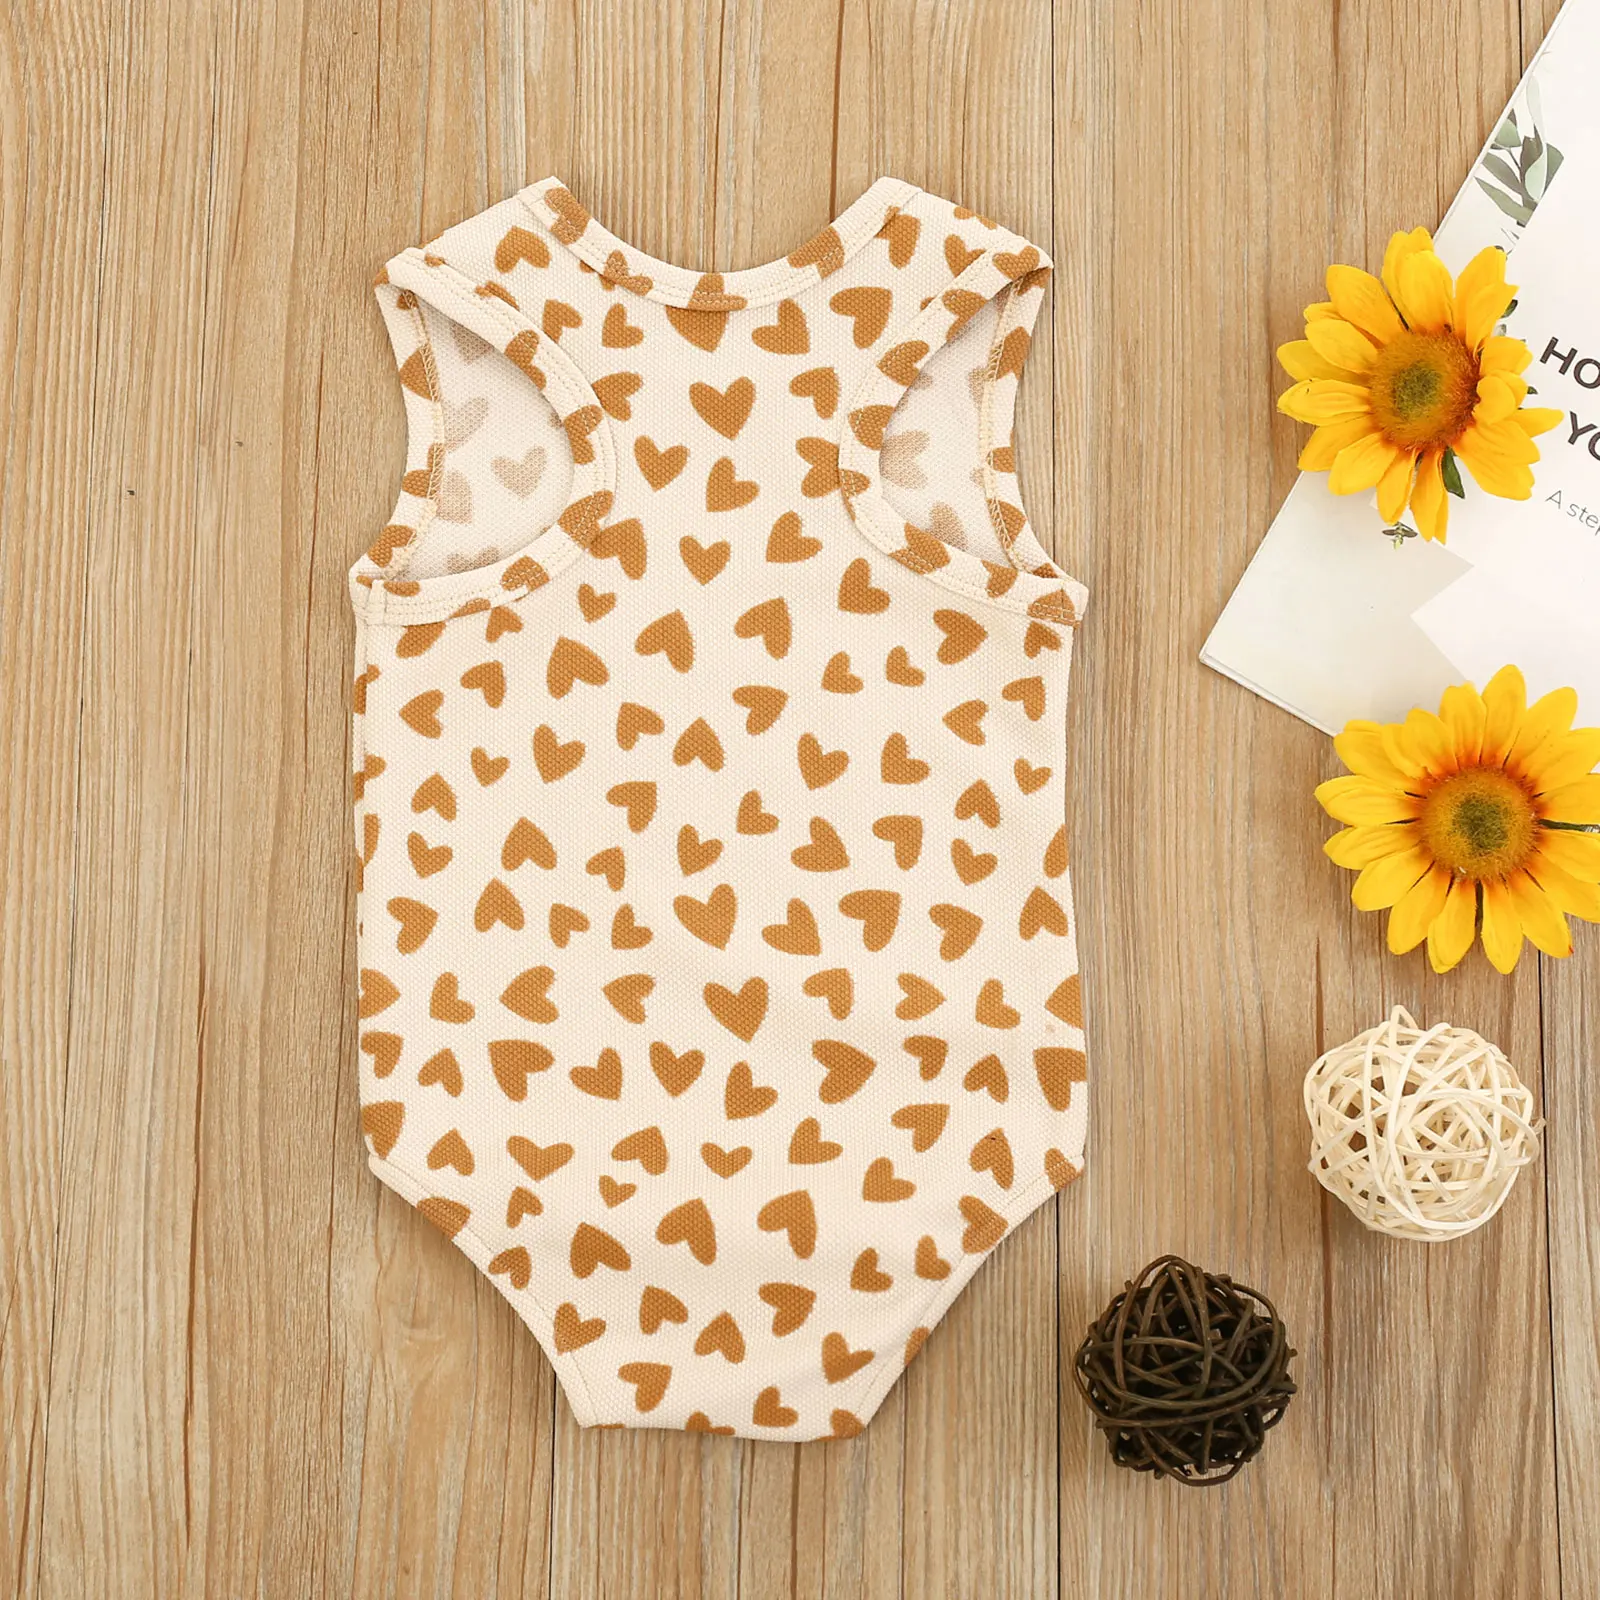 2021 0-24M Cute Toddler Baby Girl Romper Hearts Print Vest Sleeveless Summer Outfit Playsuit Jumpsuit Outfit best Baby Bodysuits